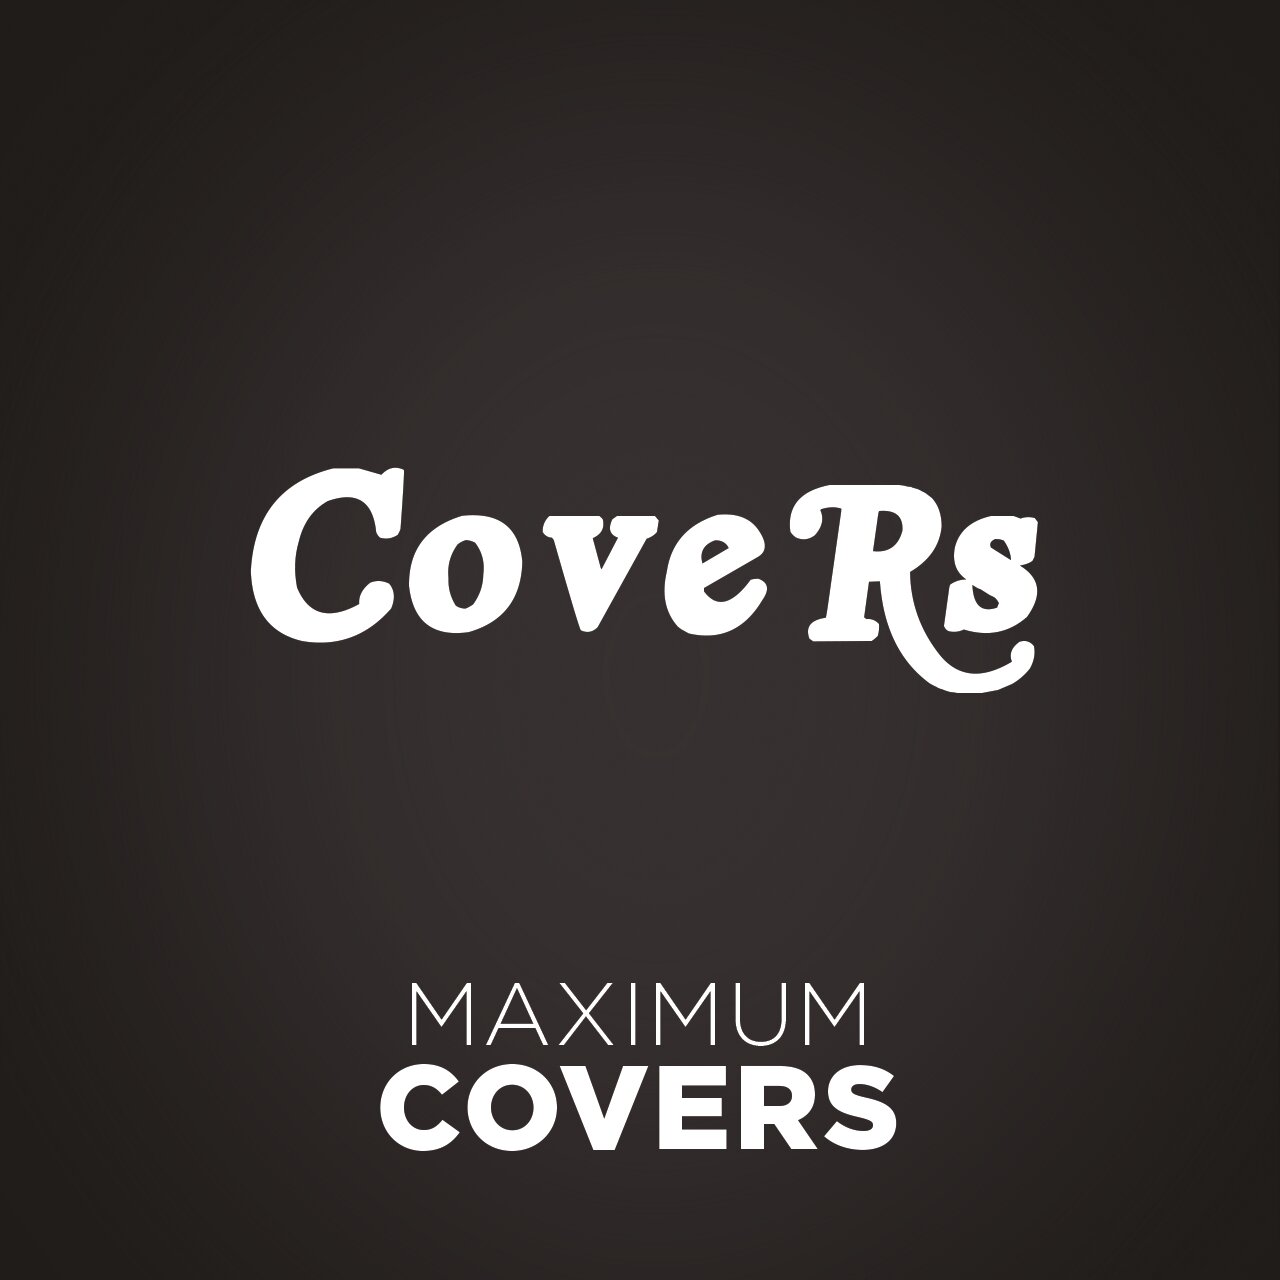 COVERS